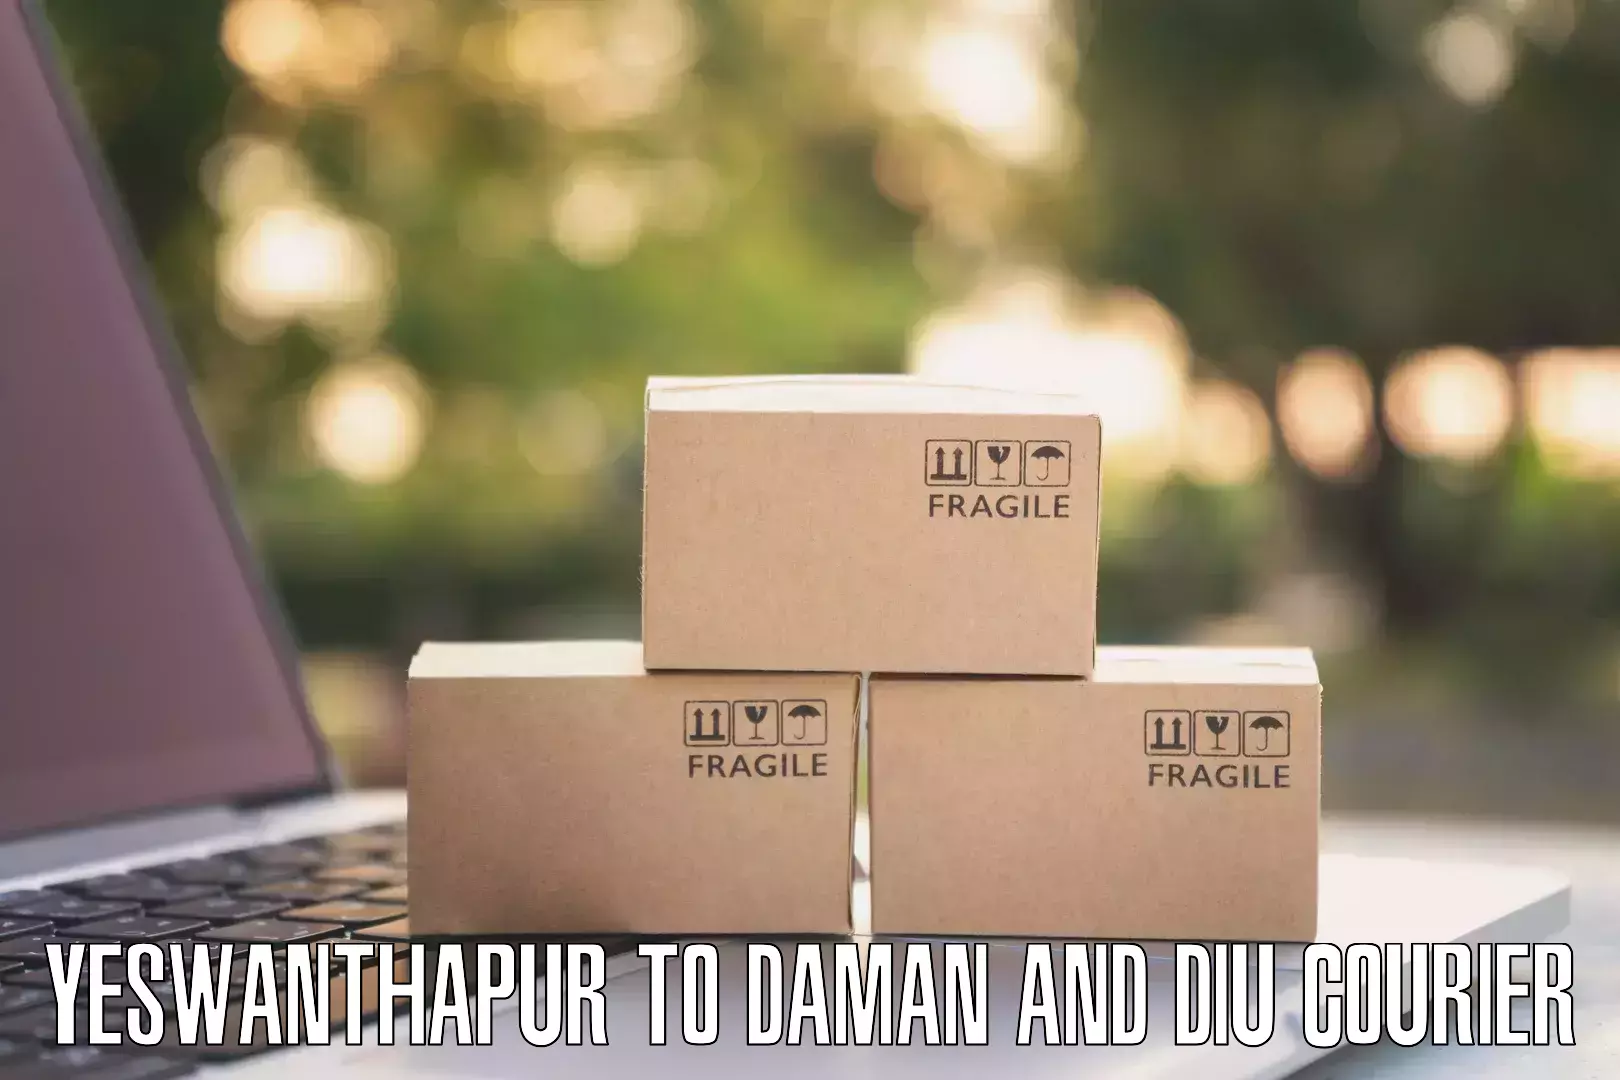 Customer-centric shipping Yeswanthapur to Daman and Diu